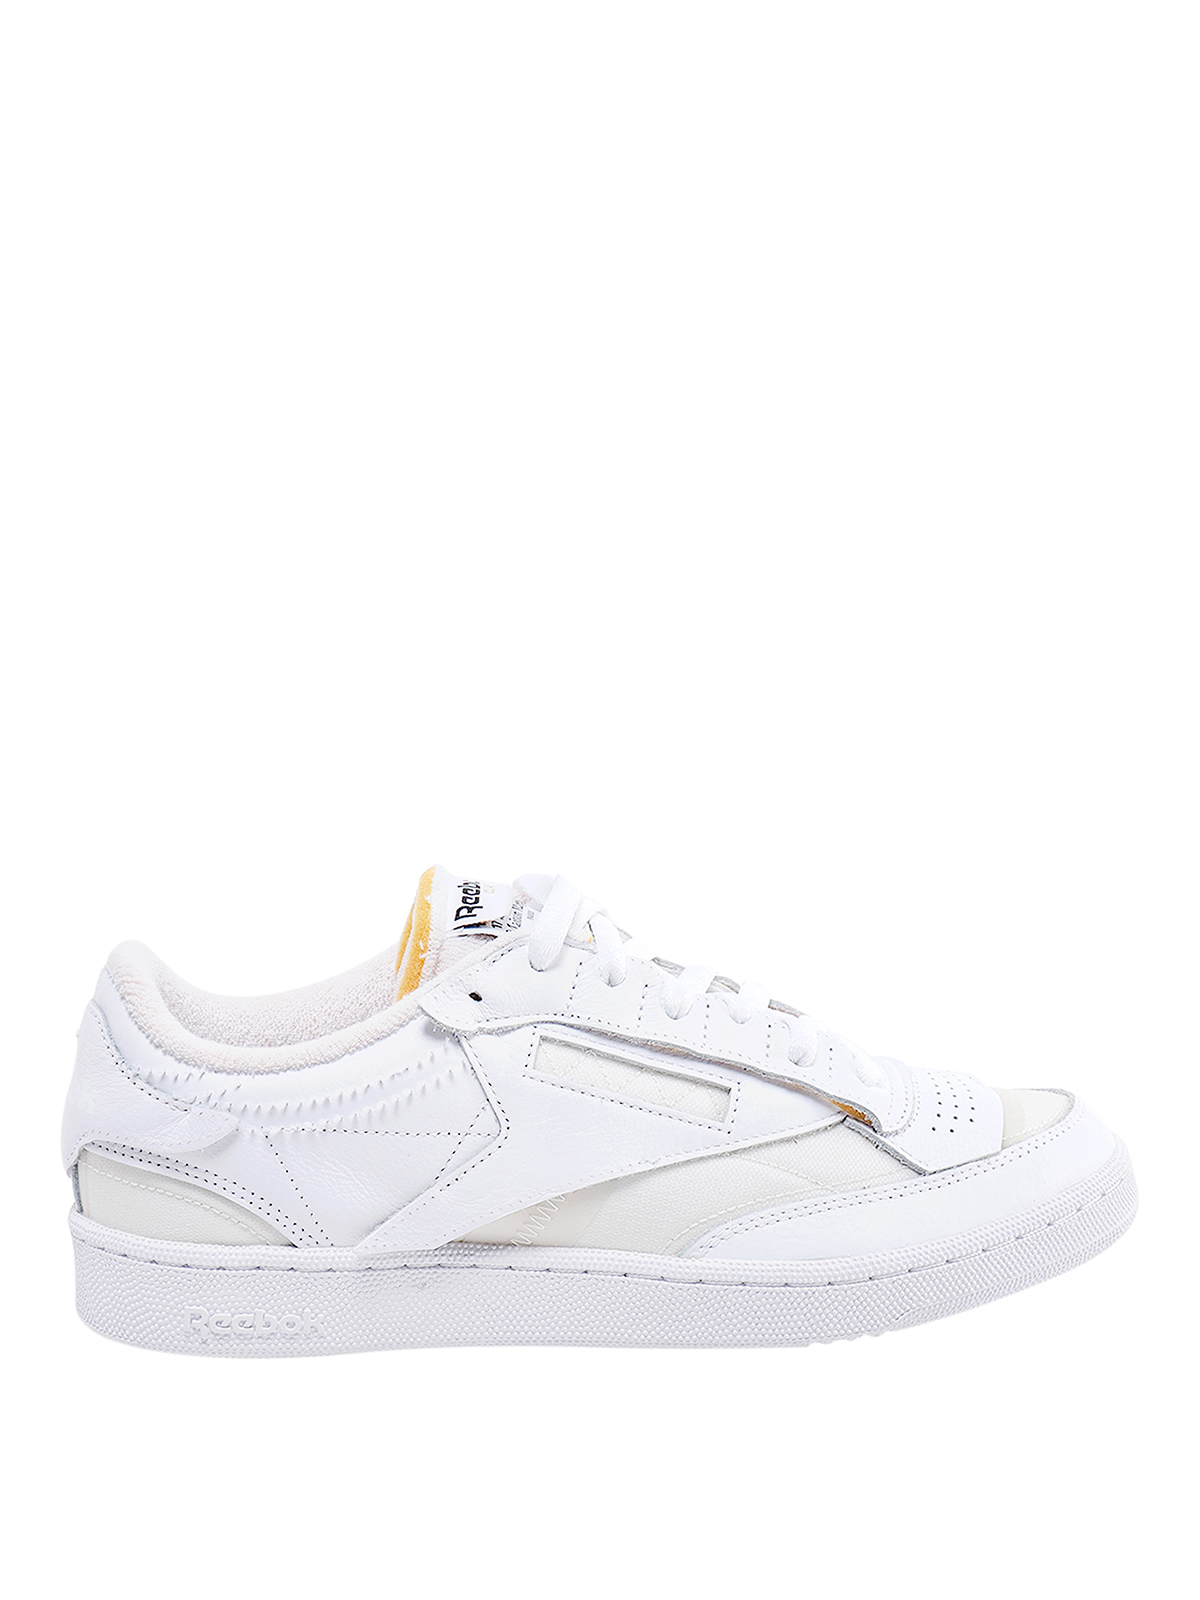 Maison Margiela Project 0 Cc Memory Of V2 Sneakers In White